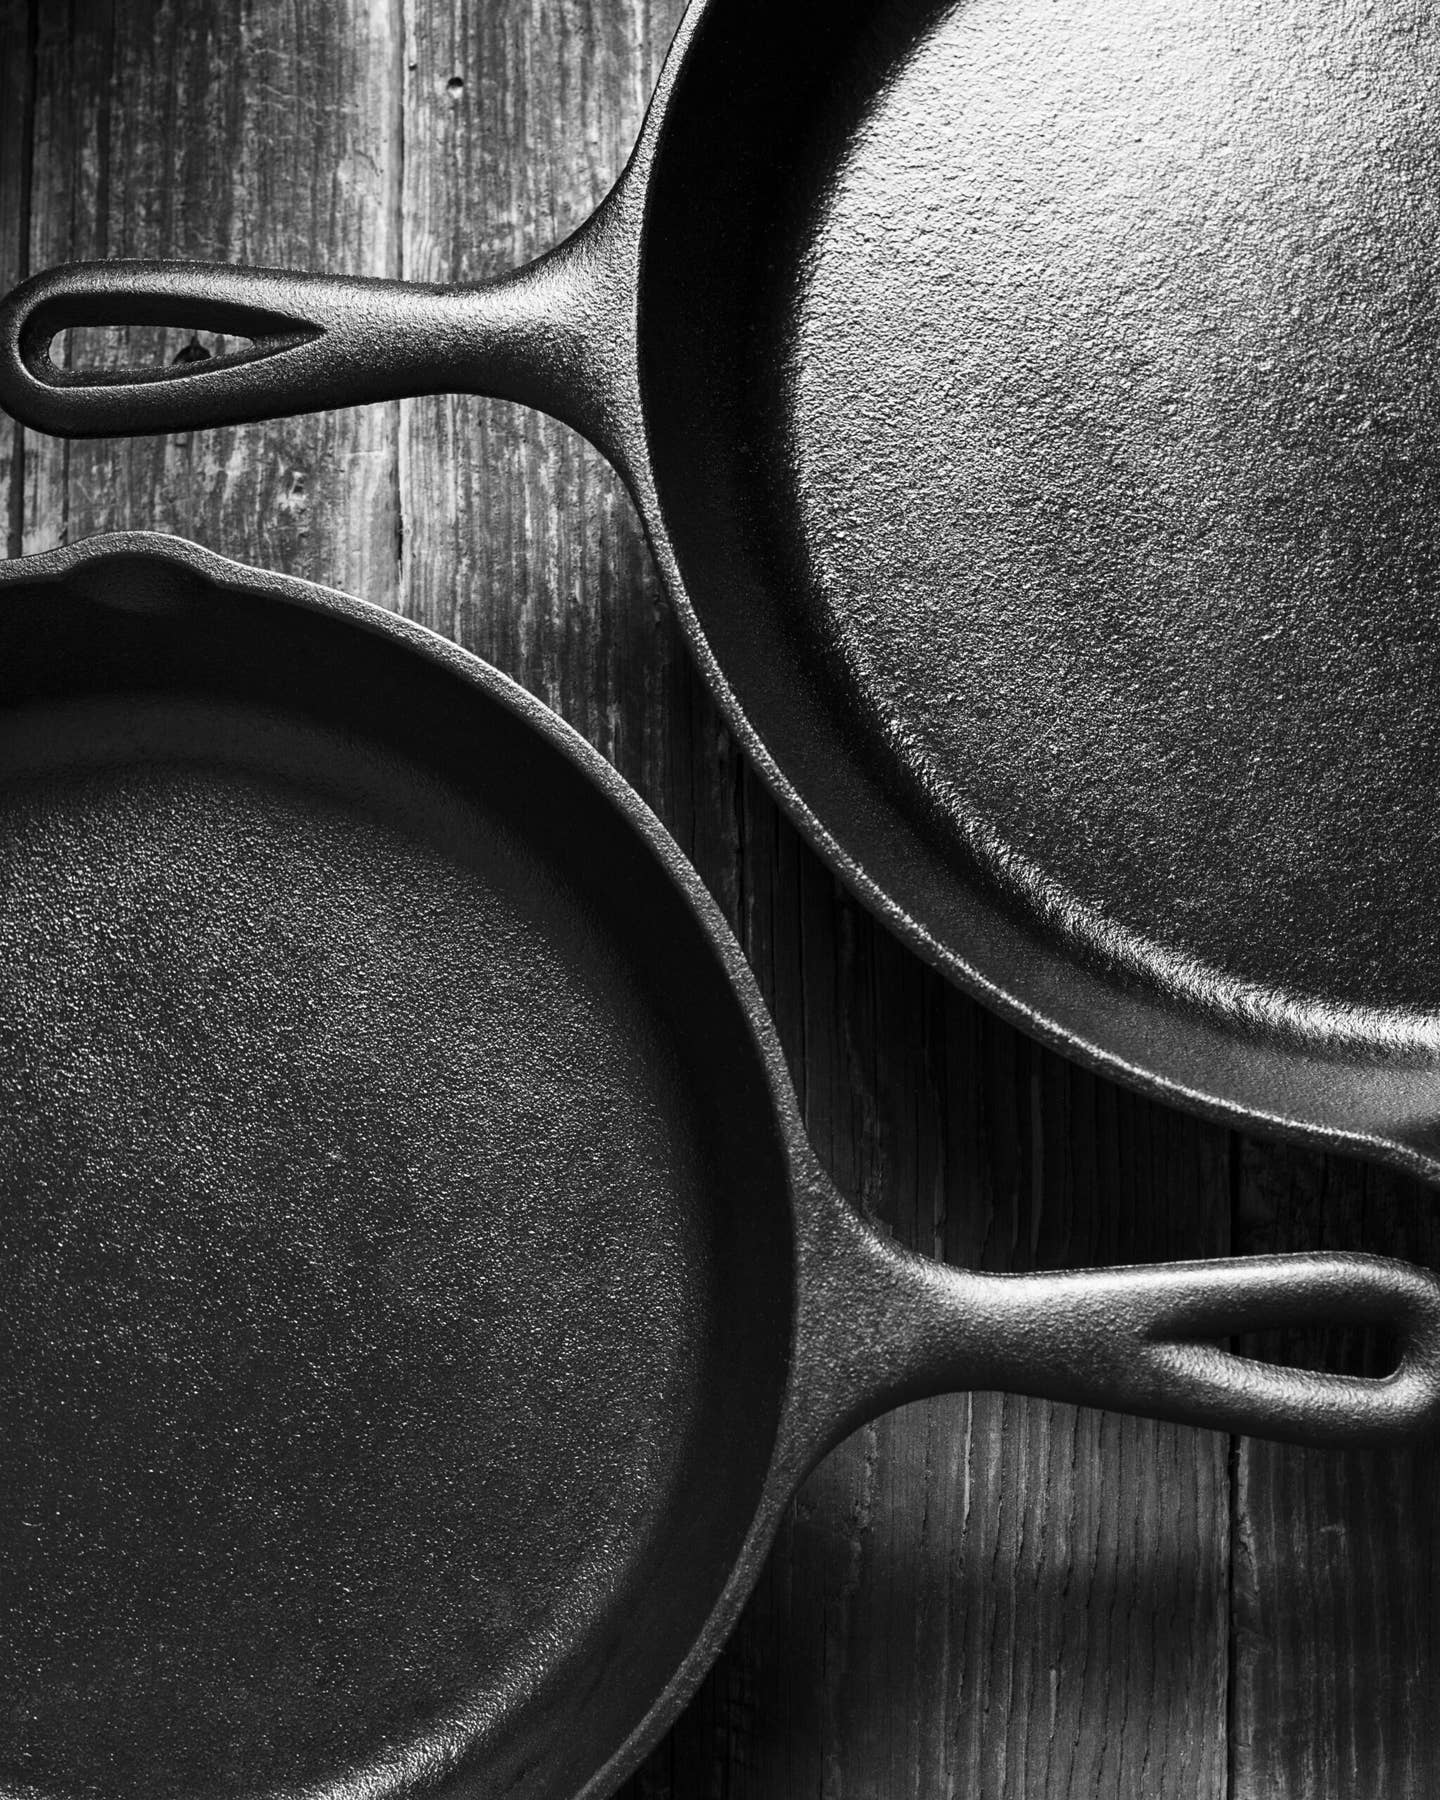 How To Clean A Cast Iron Pan